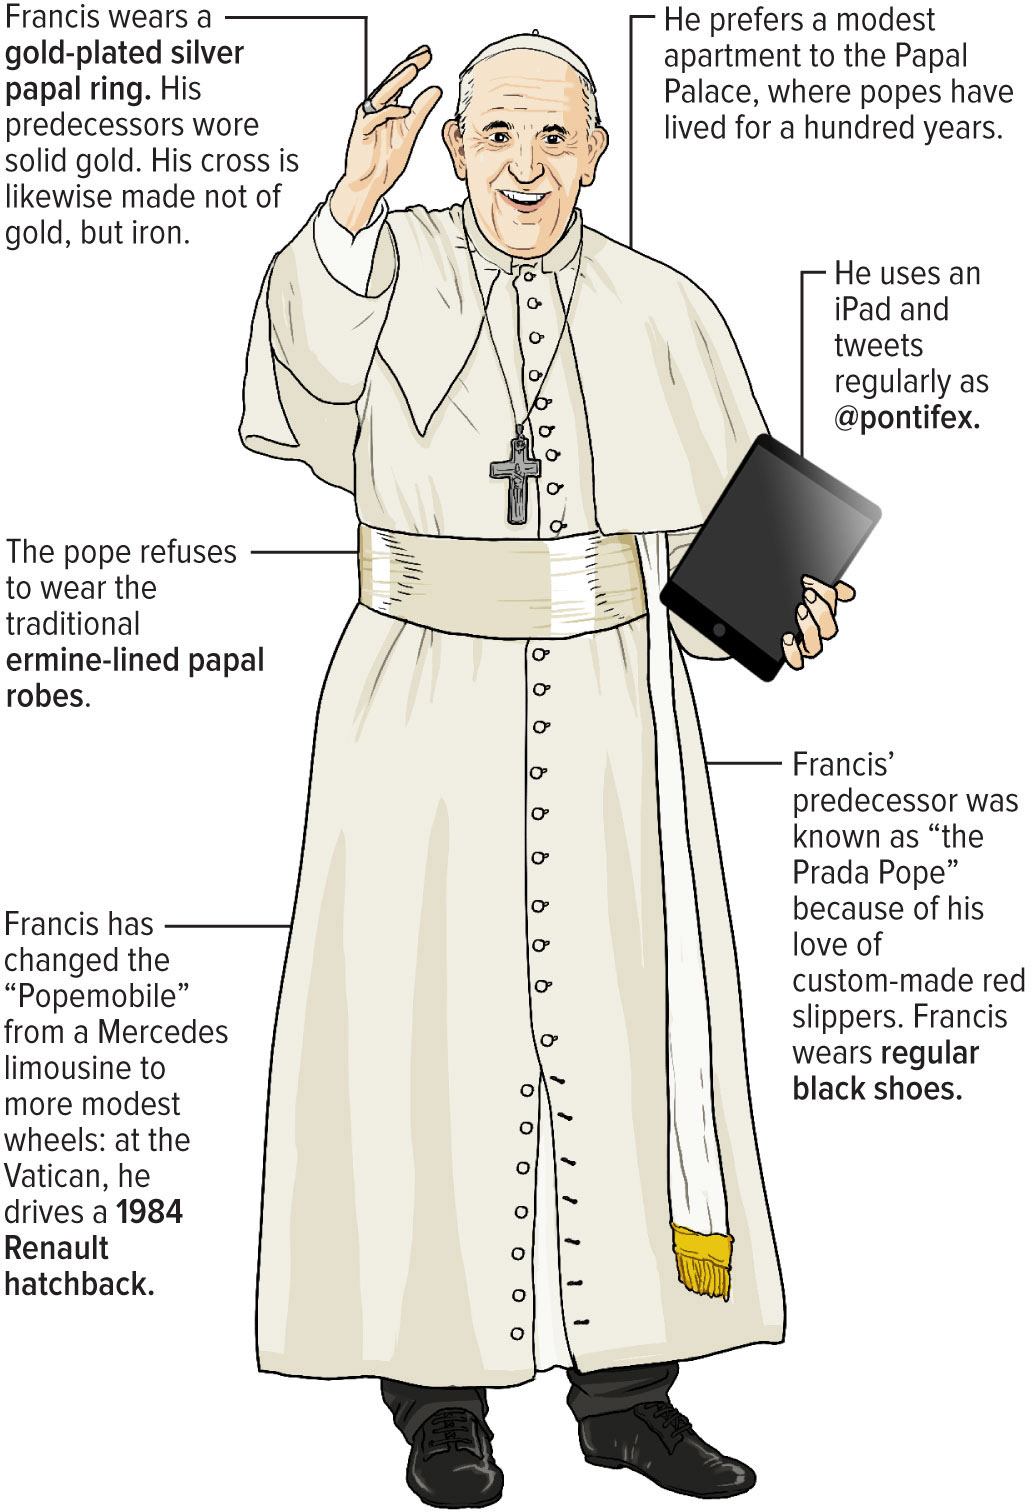 A tale of two popes: Francis vs. his predecessor